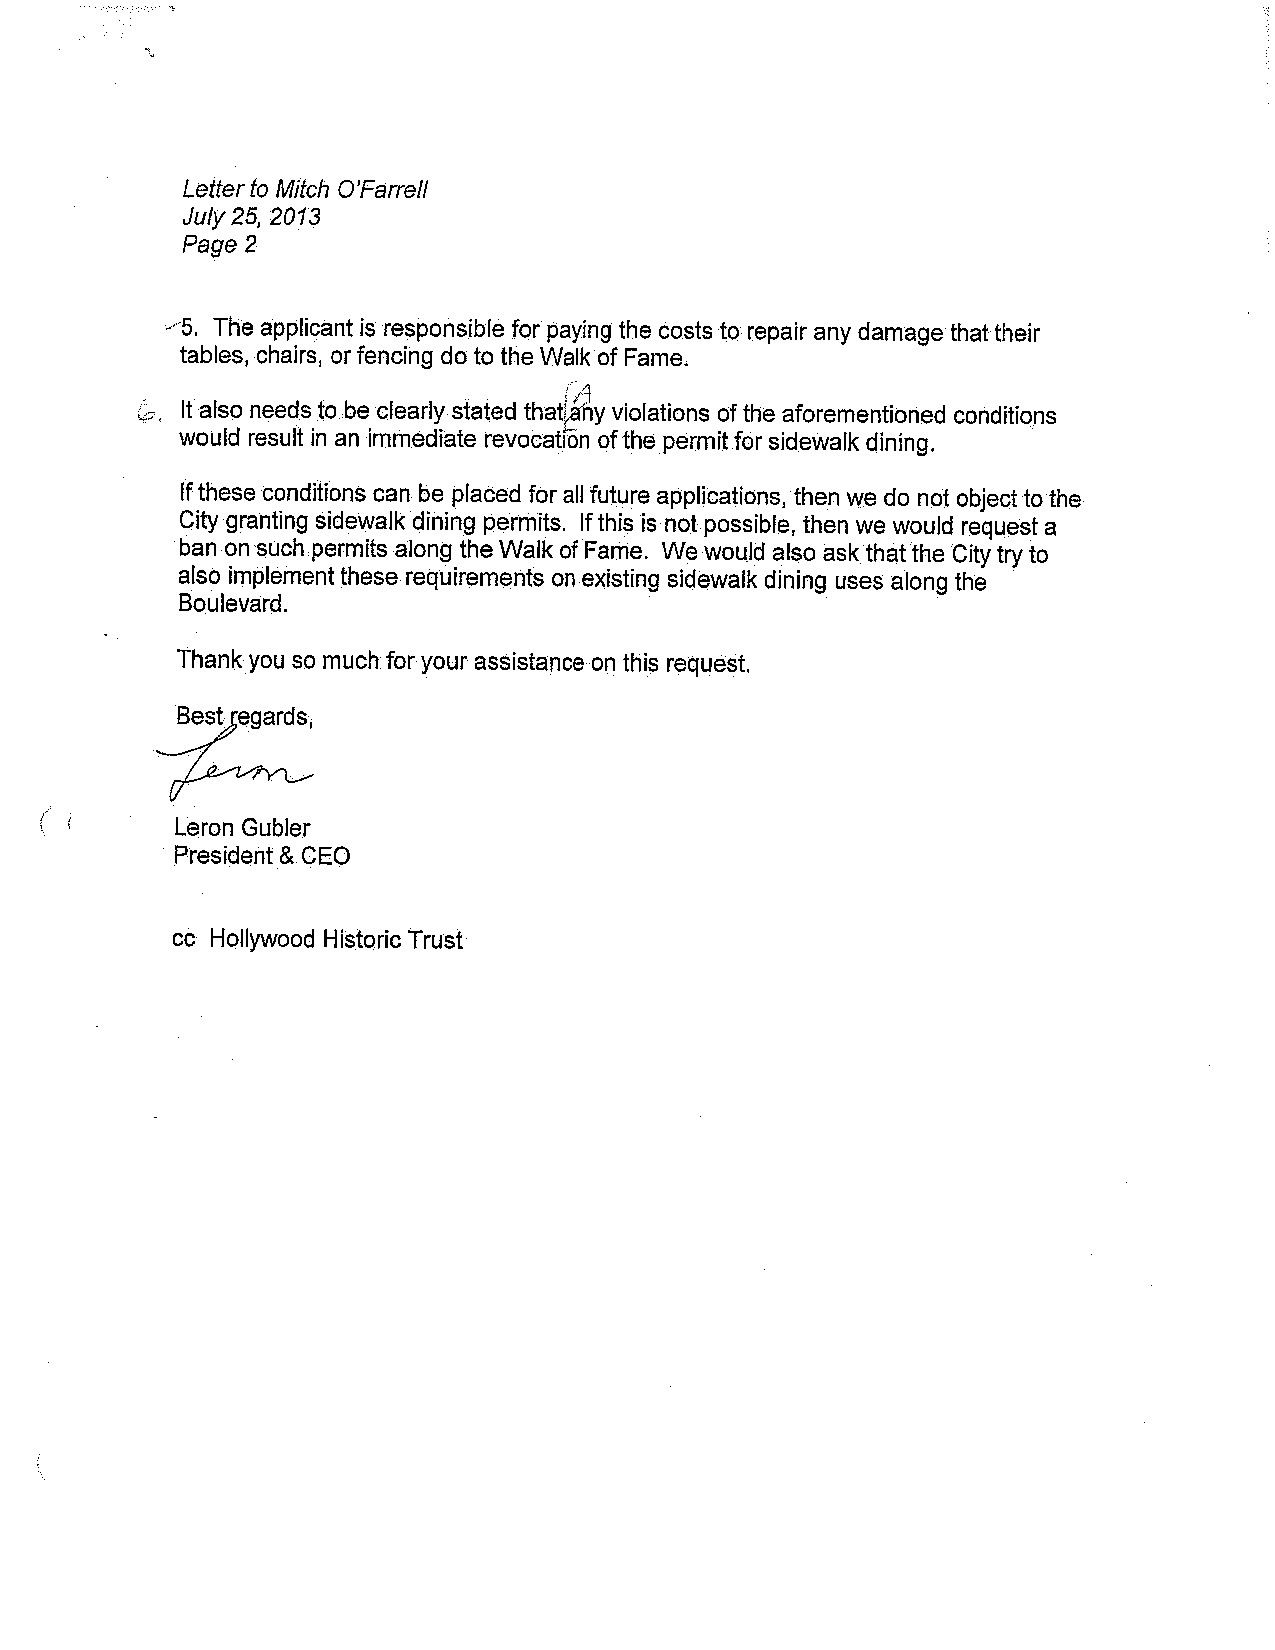 Screen shot of a Hollywood Chamber of Commerce Notification Letter, page 2